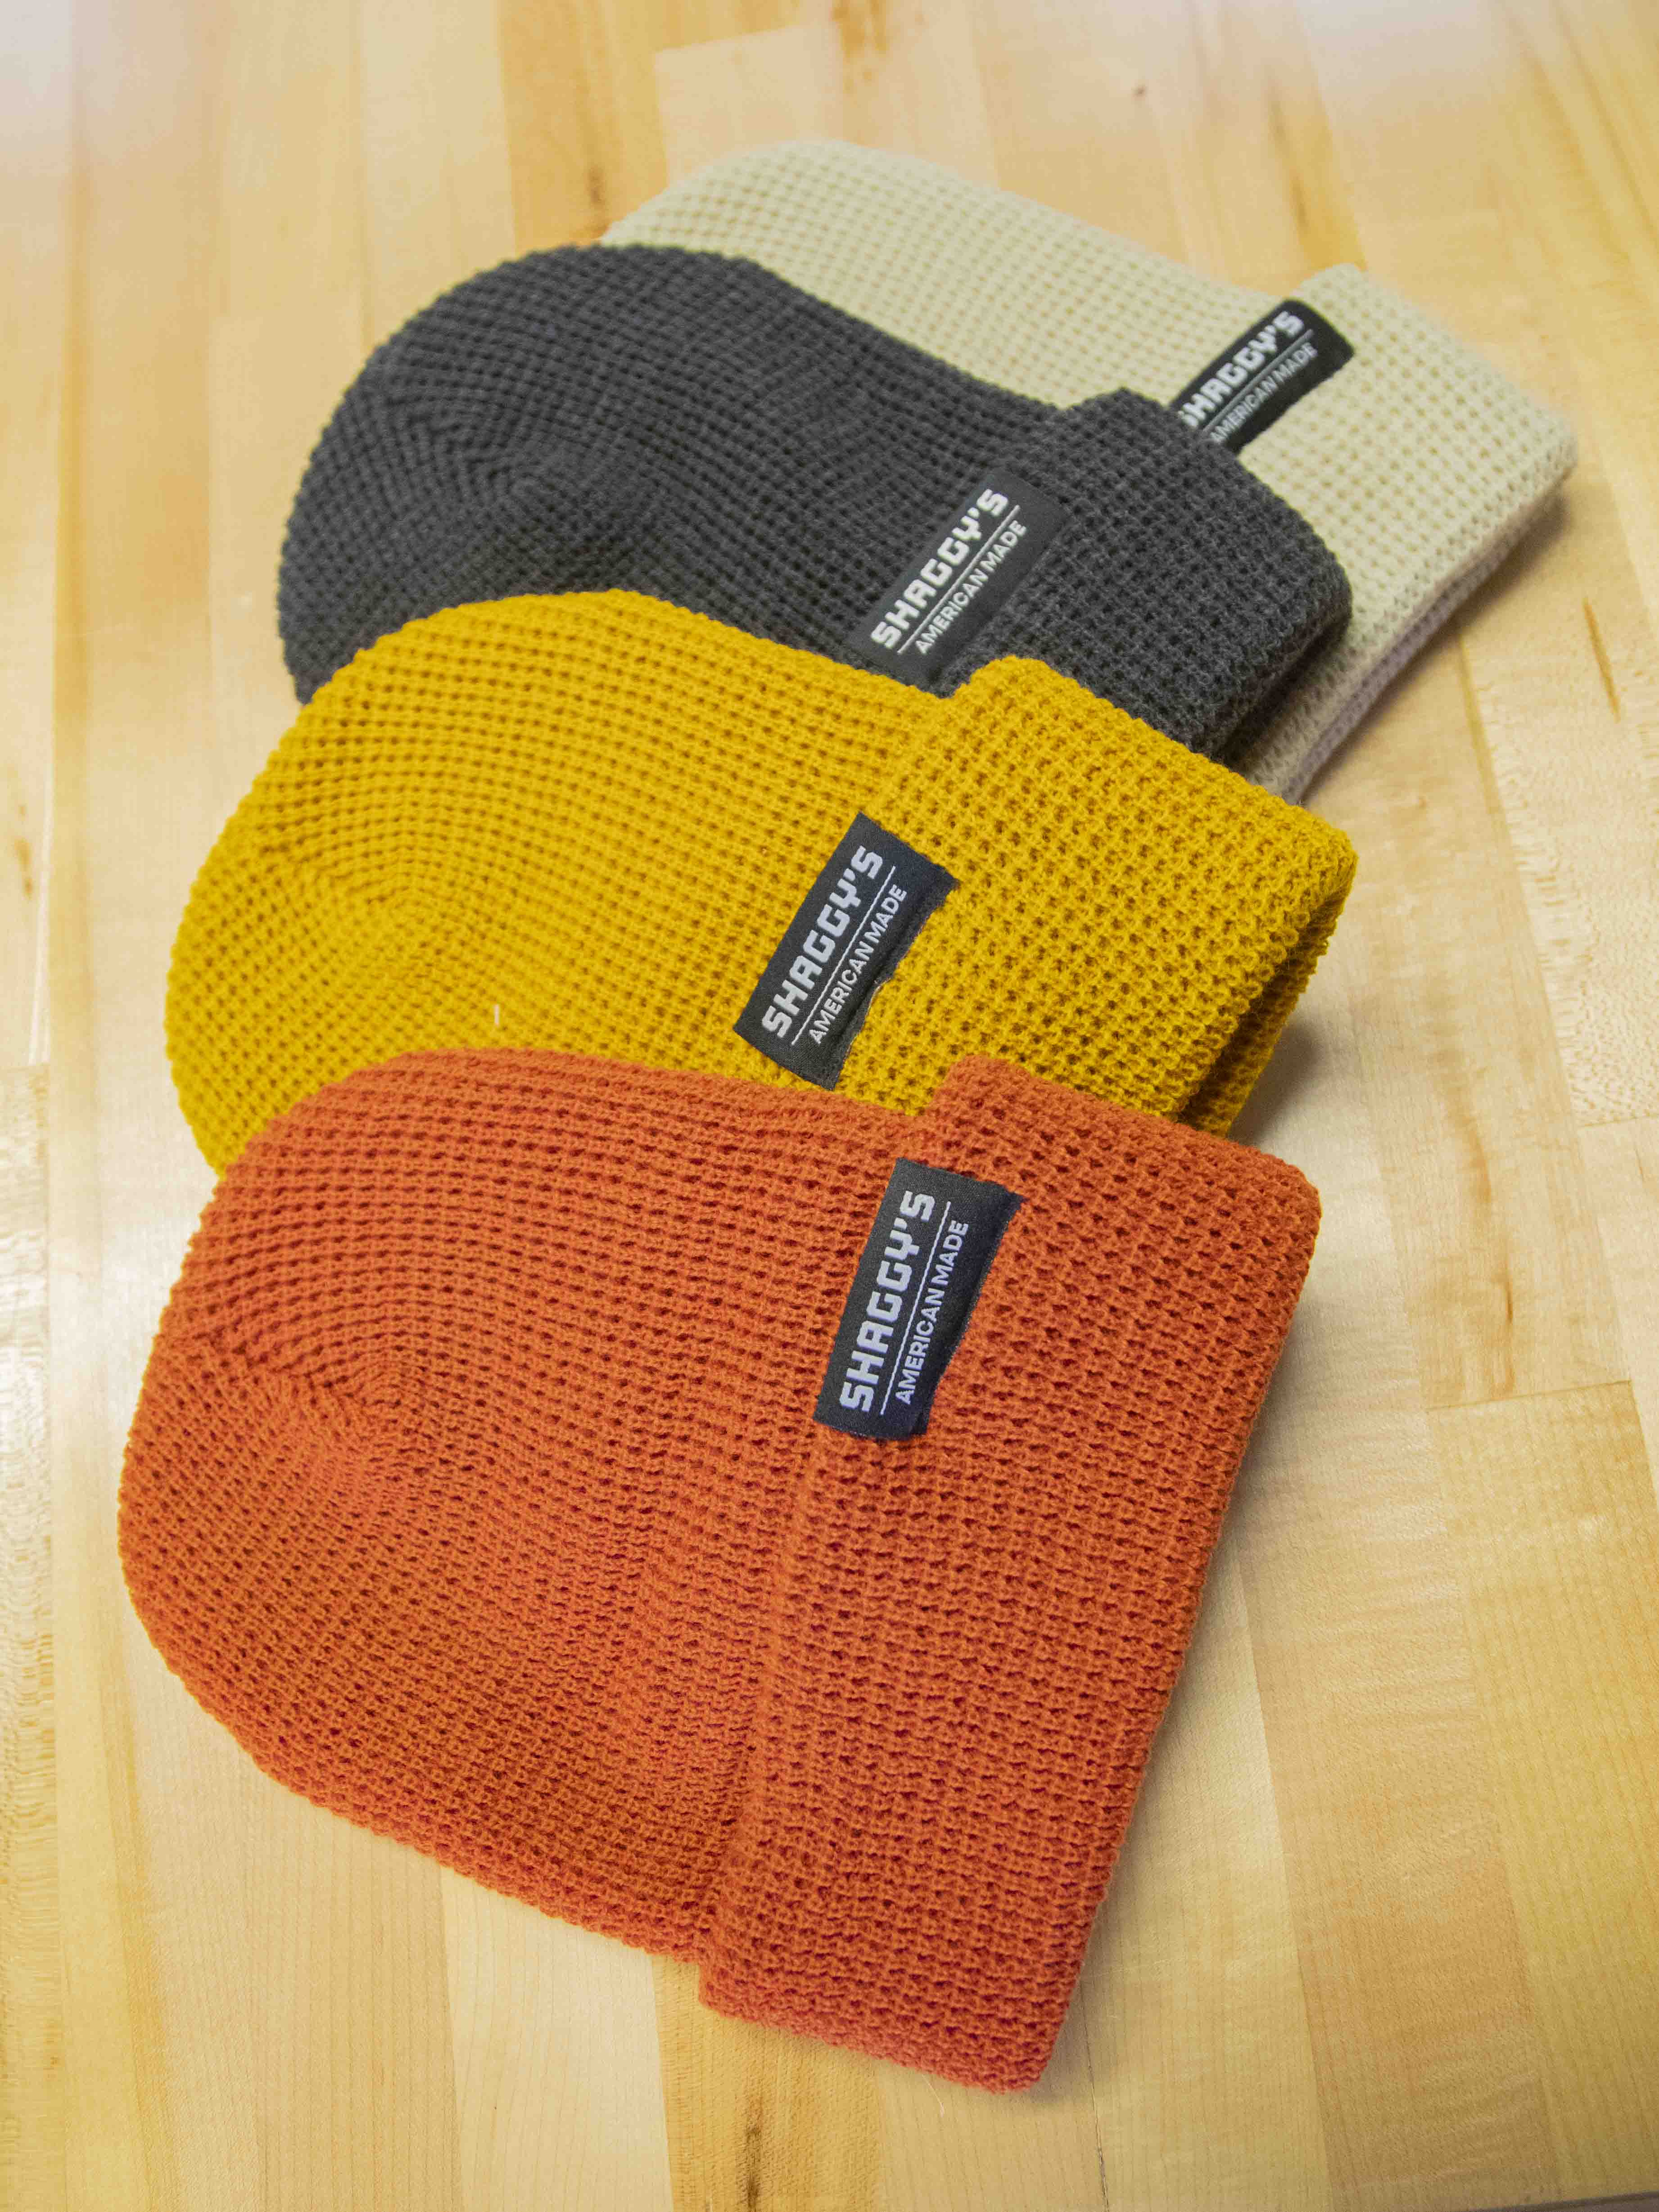 Shaggy's Waffle Knit Cuffed Beanie – Shaggy's Copper Country Skis